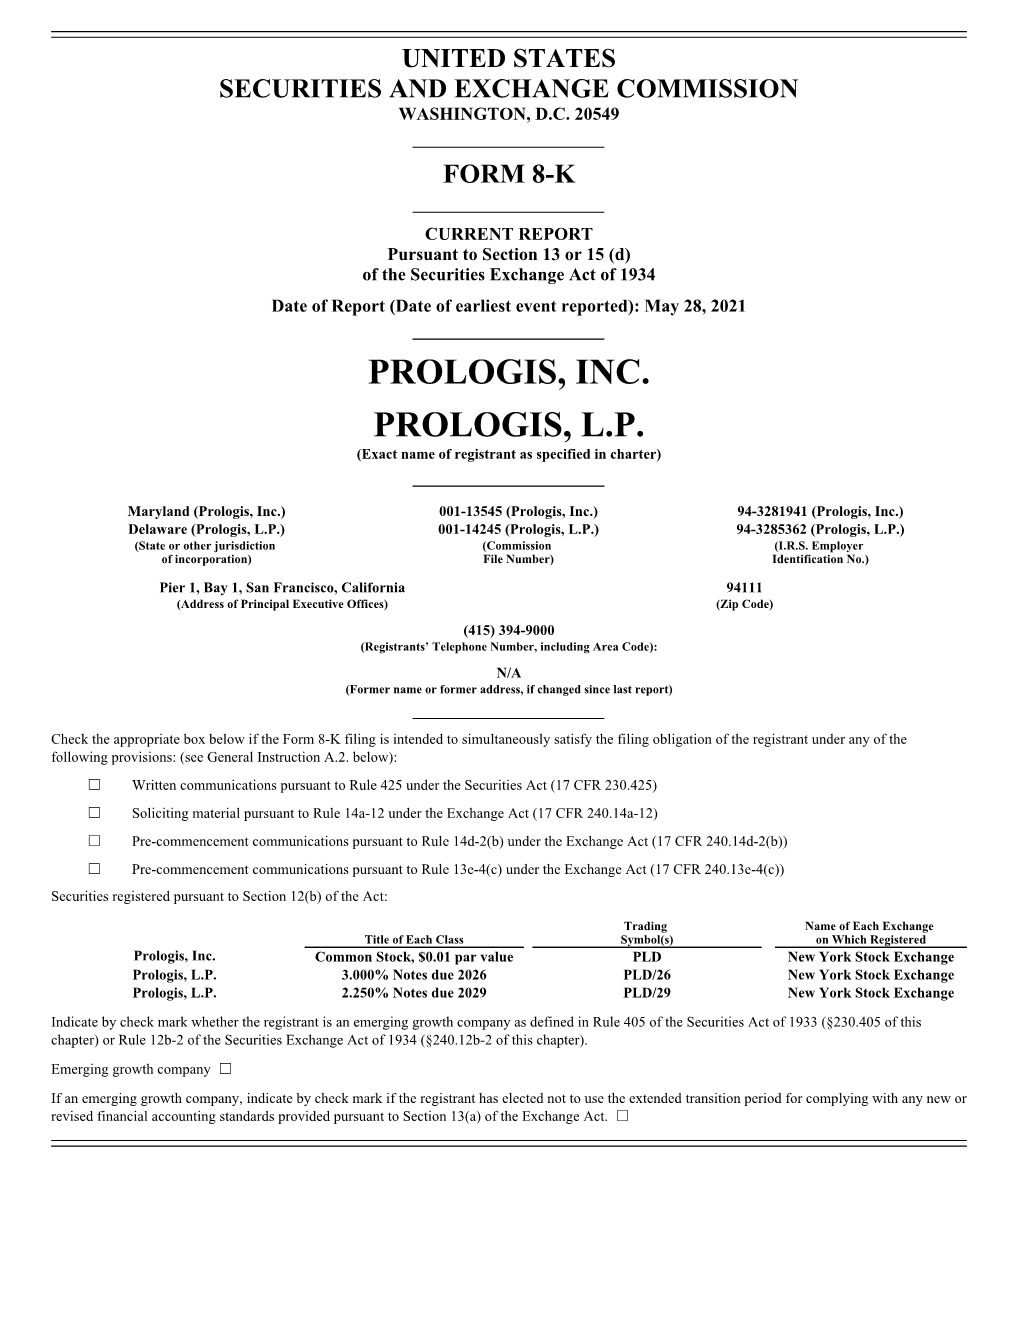 PROLOGIS, INC. PROLOGIS, L.P. (Exact Name of Registrant As Specified in Charter)